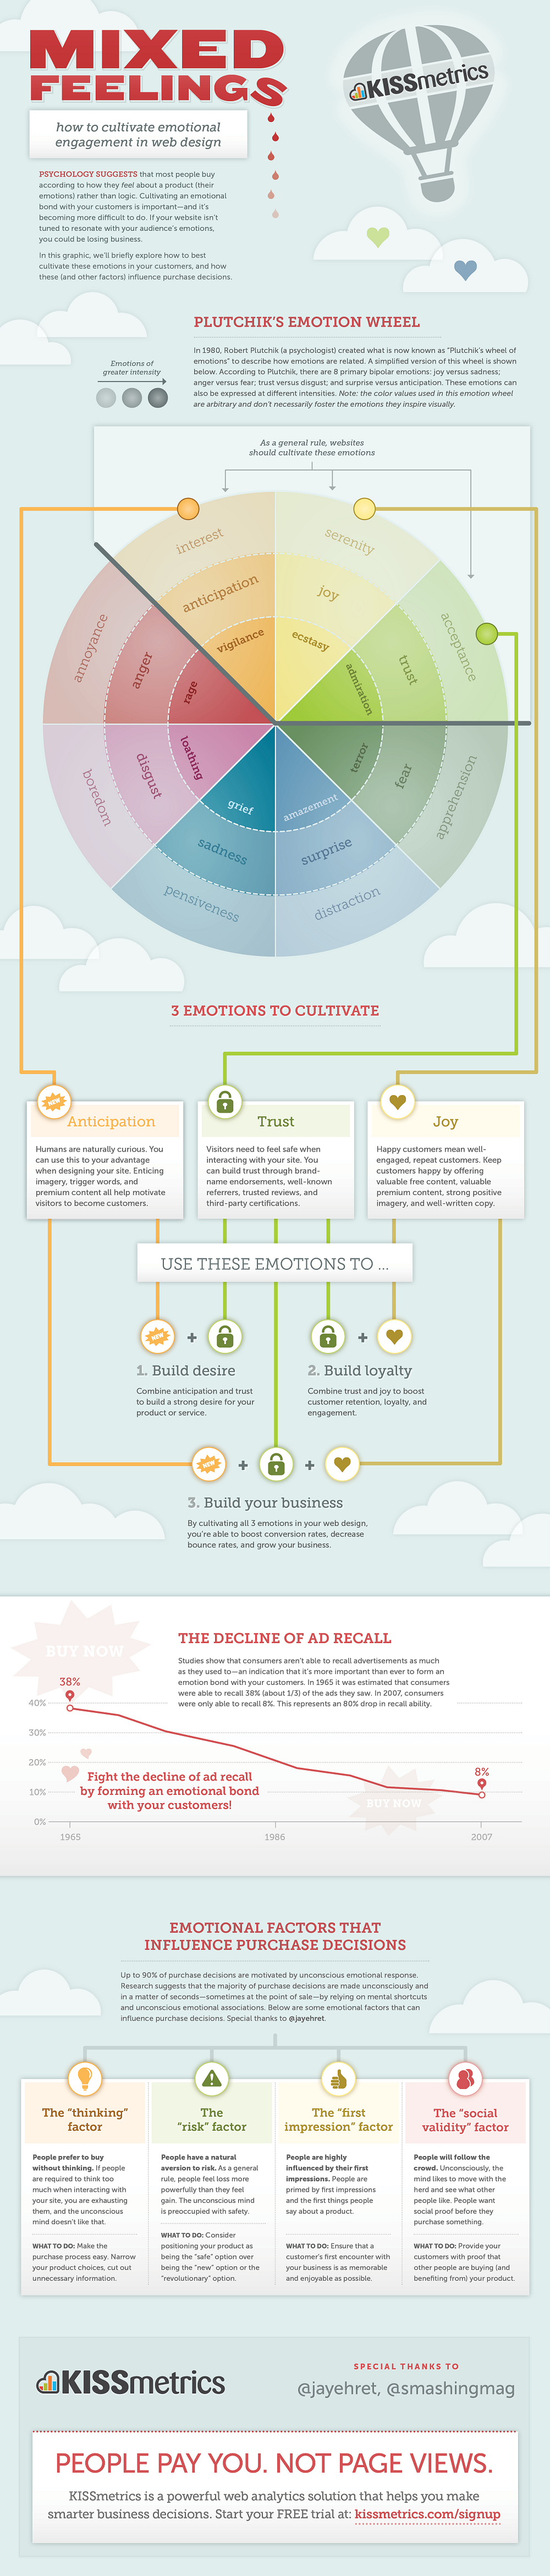 Mixed Feelings in Webdesign [Infographic]